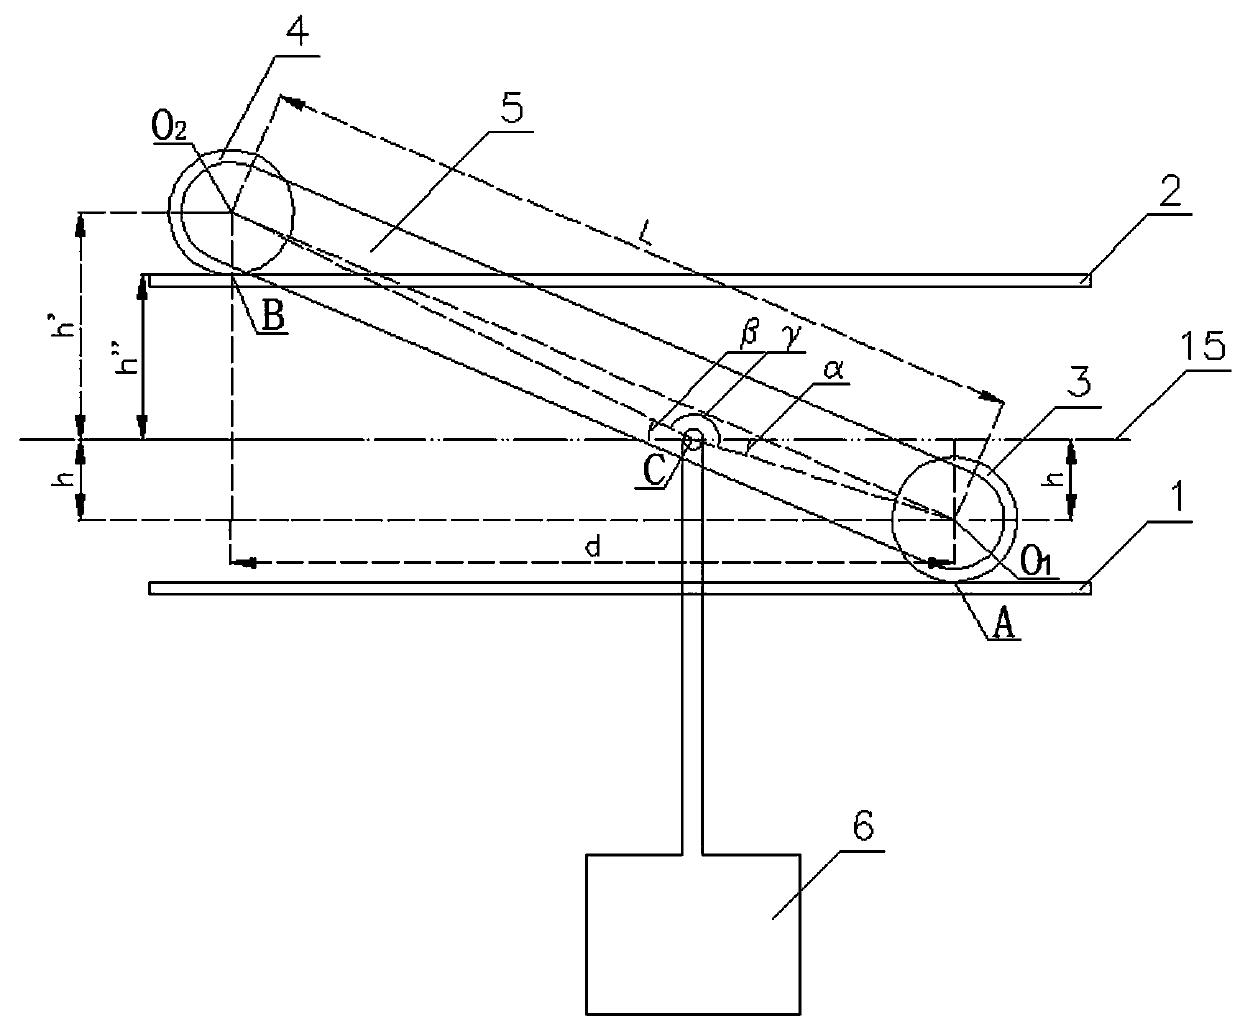 A compensating overhead rail carrier device for keeping the carrier running horizontally